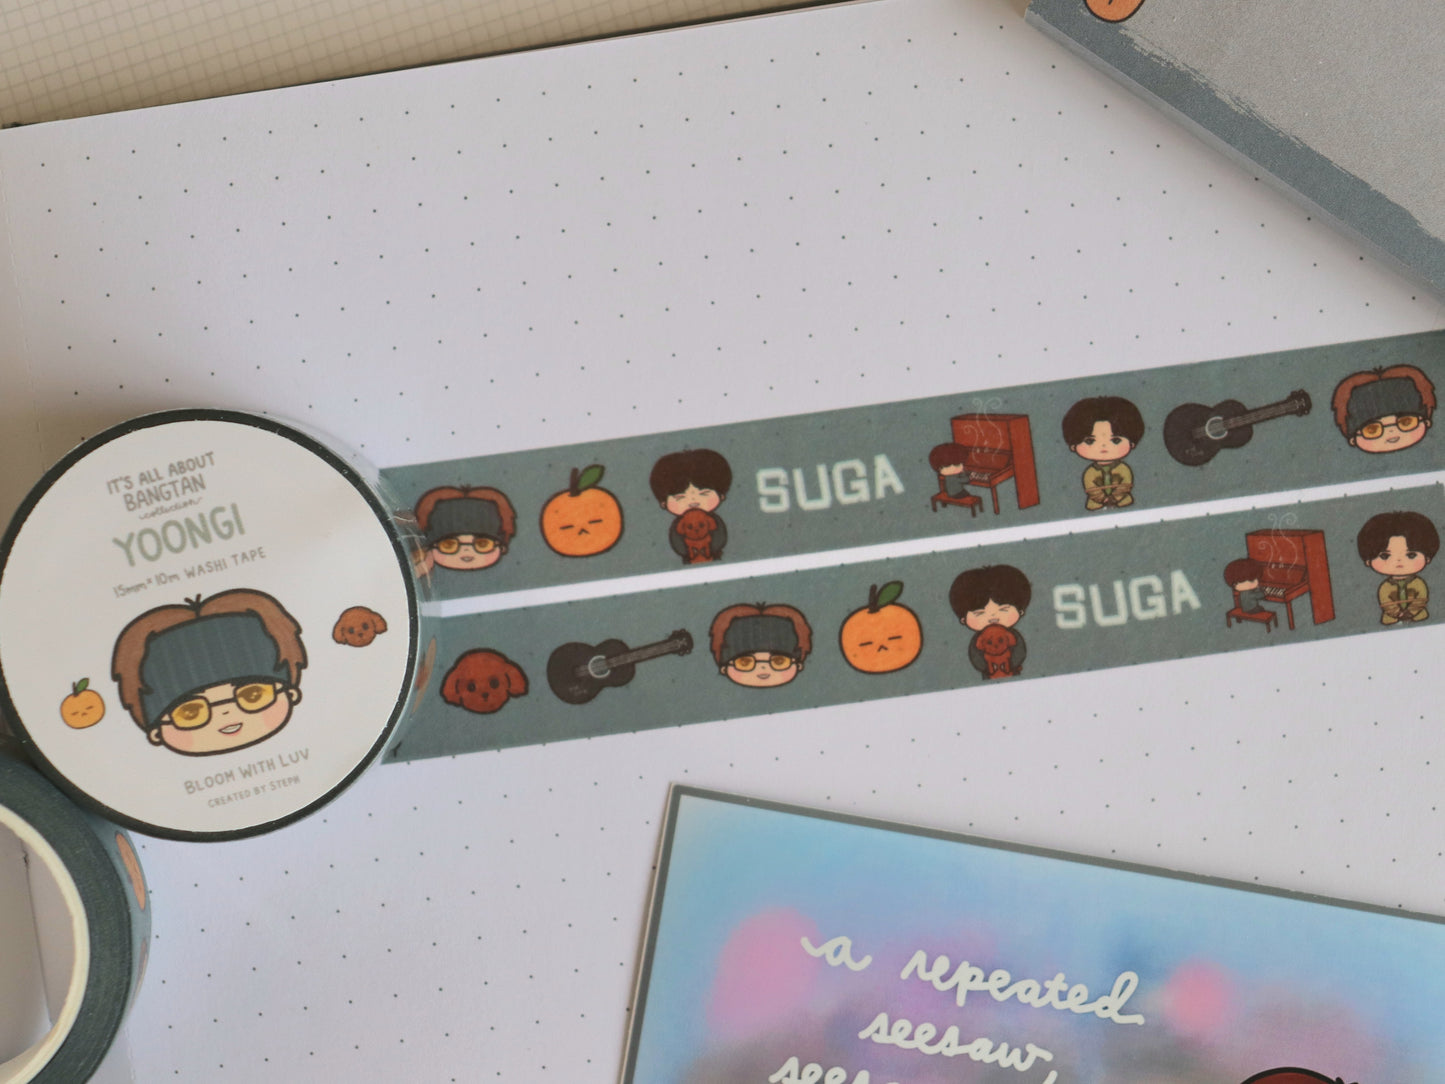 It's All About Yoongi FULL SET - [It's All About Bangtan Collection]